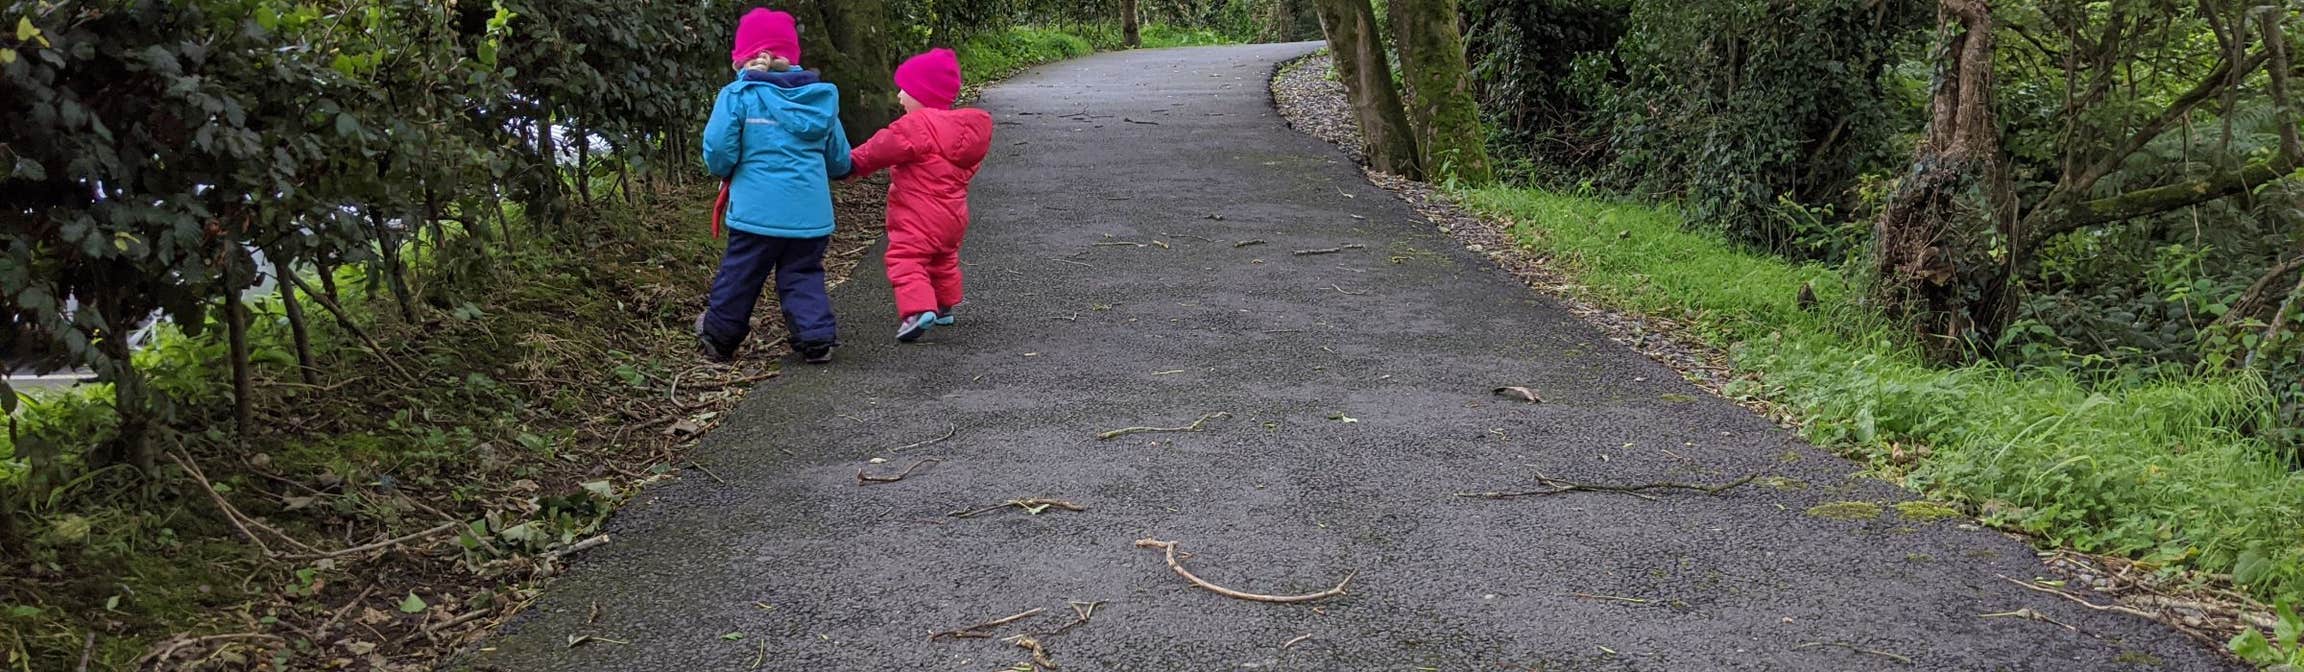 Image of two children on a path in Bere Island in County Mayo